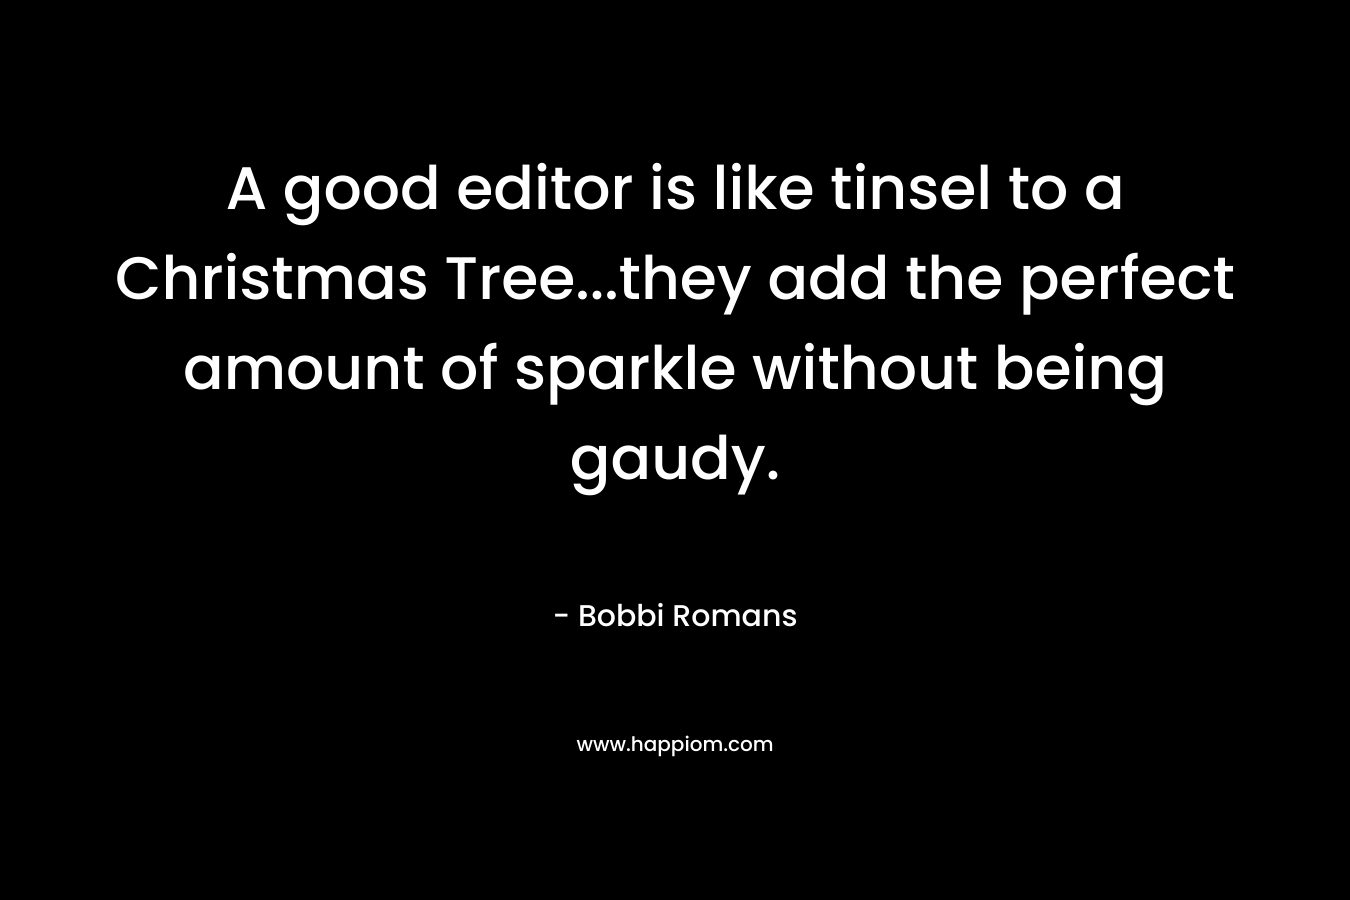 A good editor is like tinsel to a Christmas Tree...they add the perfect amount of sparkle without being gaudy.